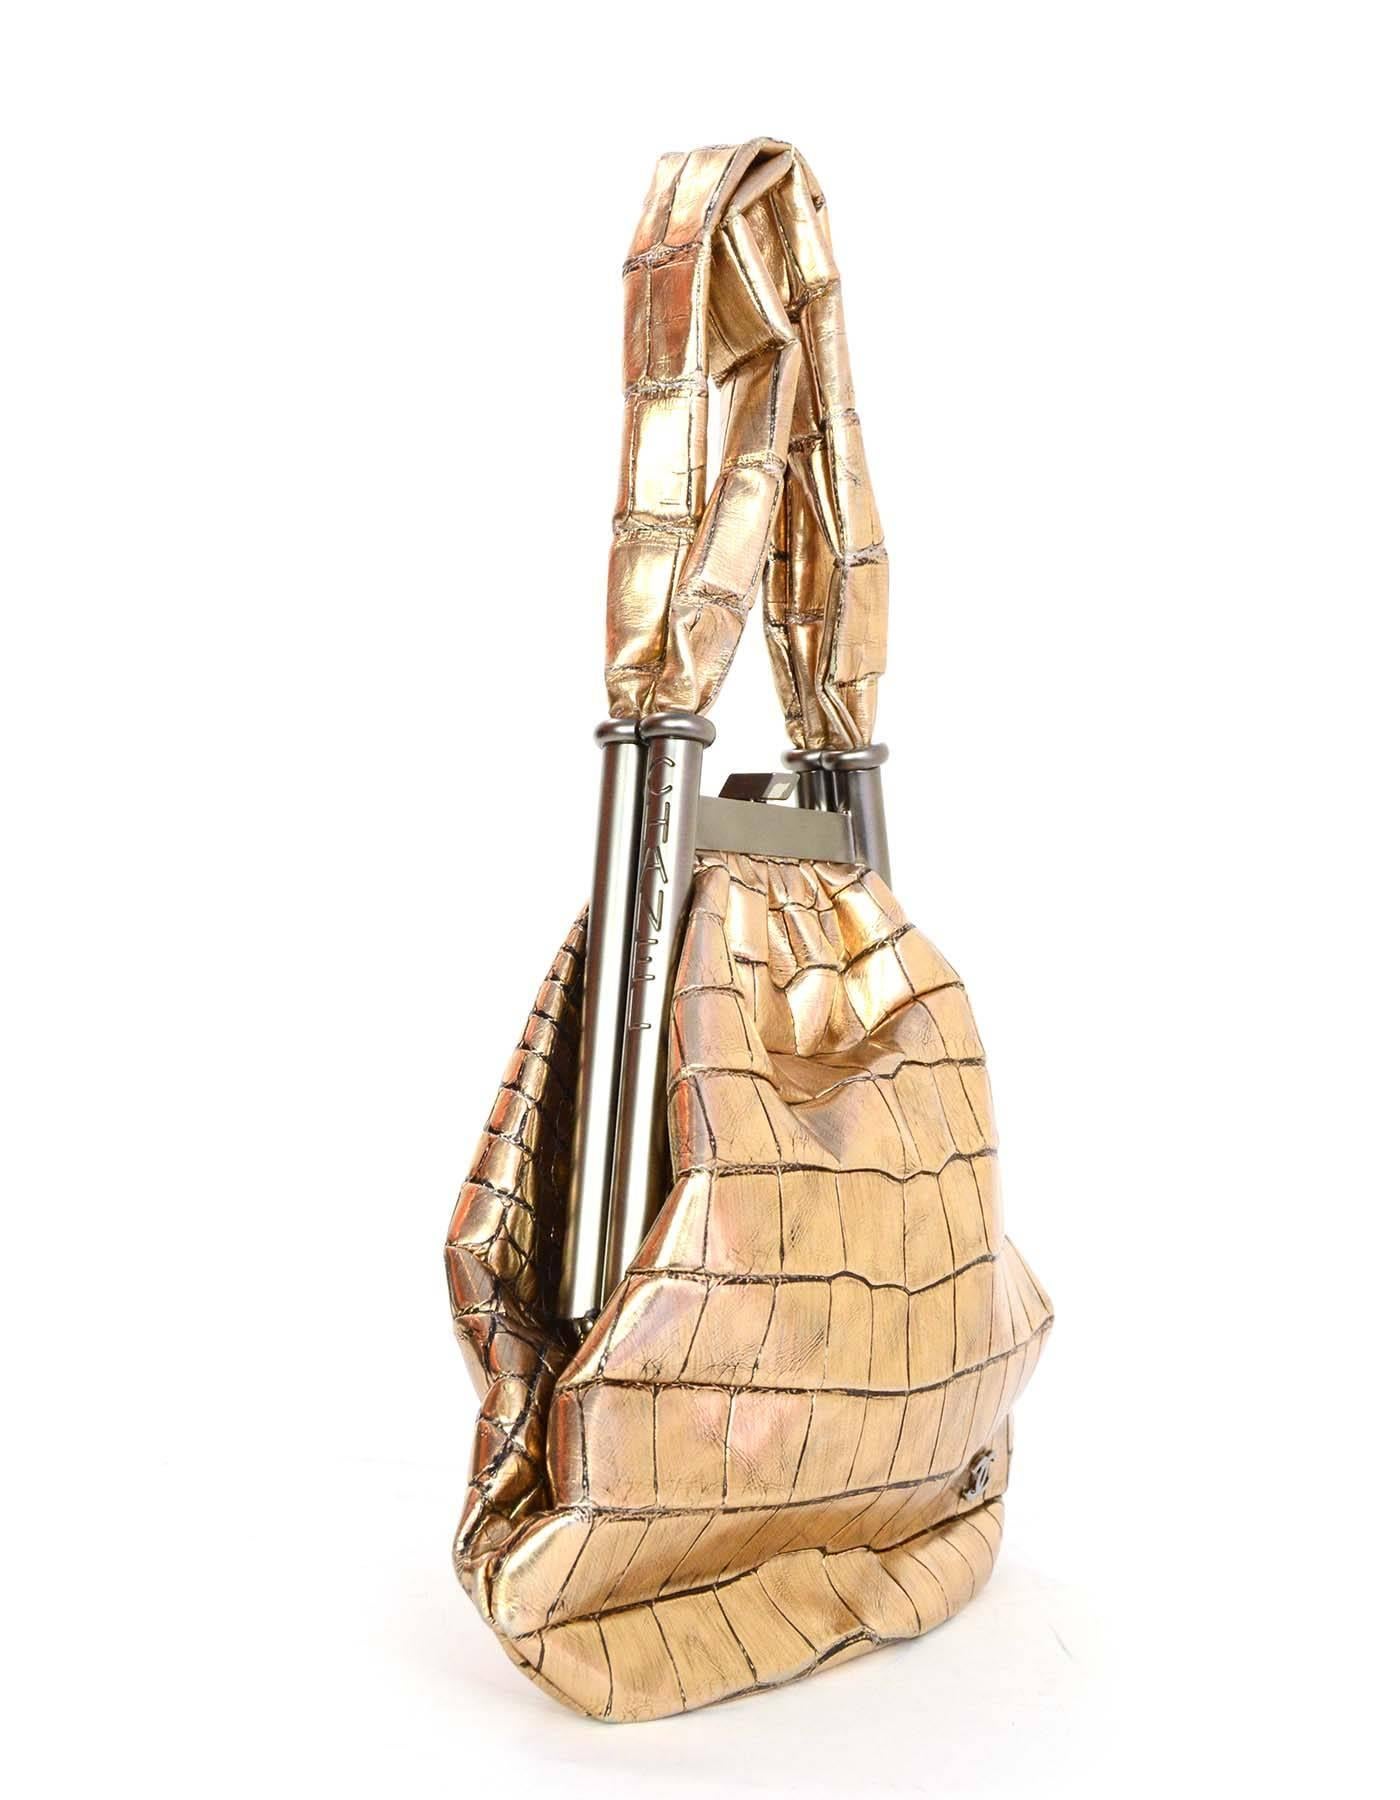 Chanel Metallic Gold Crocodile Frame Bag 
Features small ruthenium CC charm at bottom corner of front panel of bag
Made In: France
Year of Production: 2006-2008
Color: Metallic distressed gold
Hardware: Matte slvertone and ruthenium
Materials: